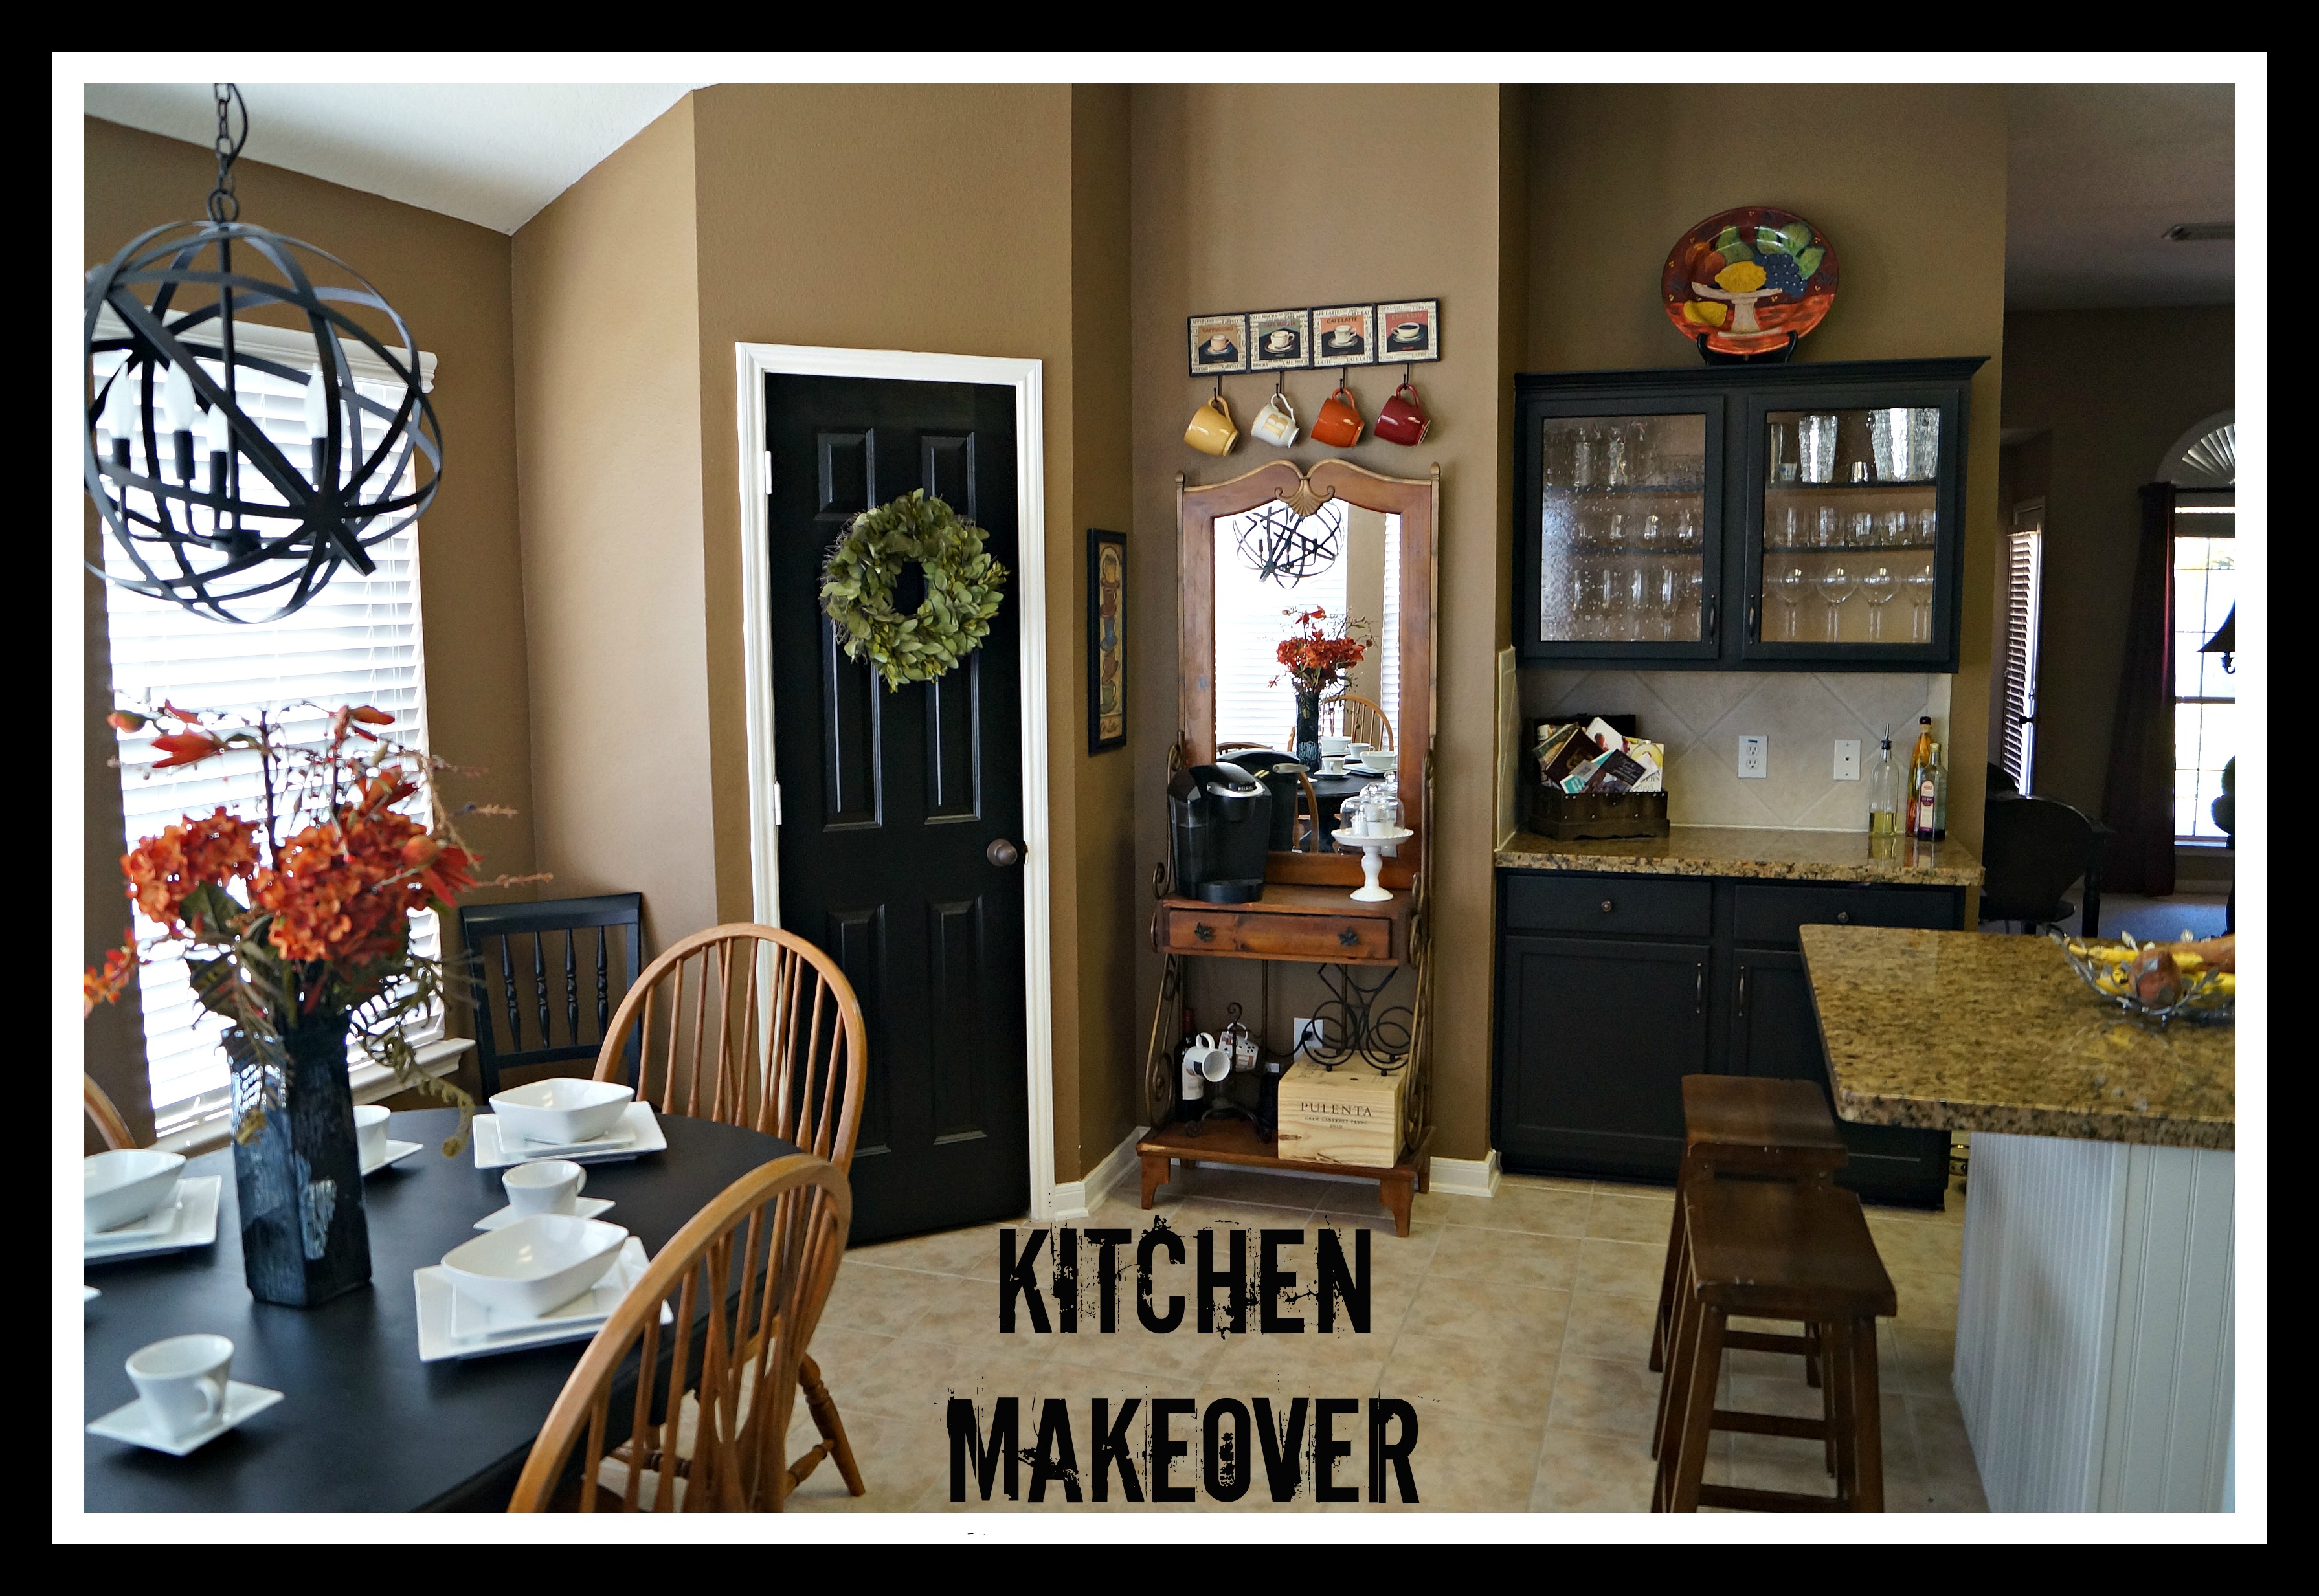 Paint Your Builder Grade Kitchen Cabinets Diy Style My Kitchen Makeover Pinvestigation The Action Of Investigating A Pin Post Product Or Place